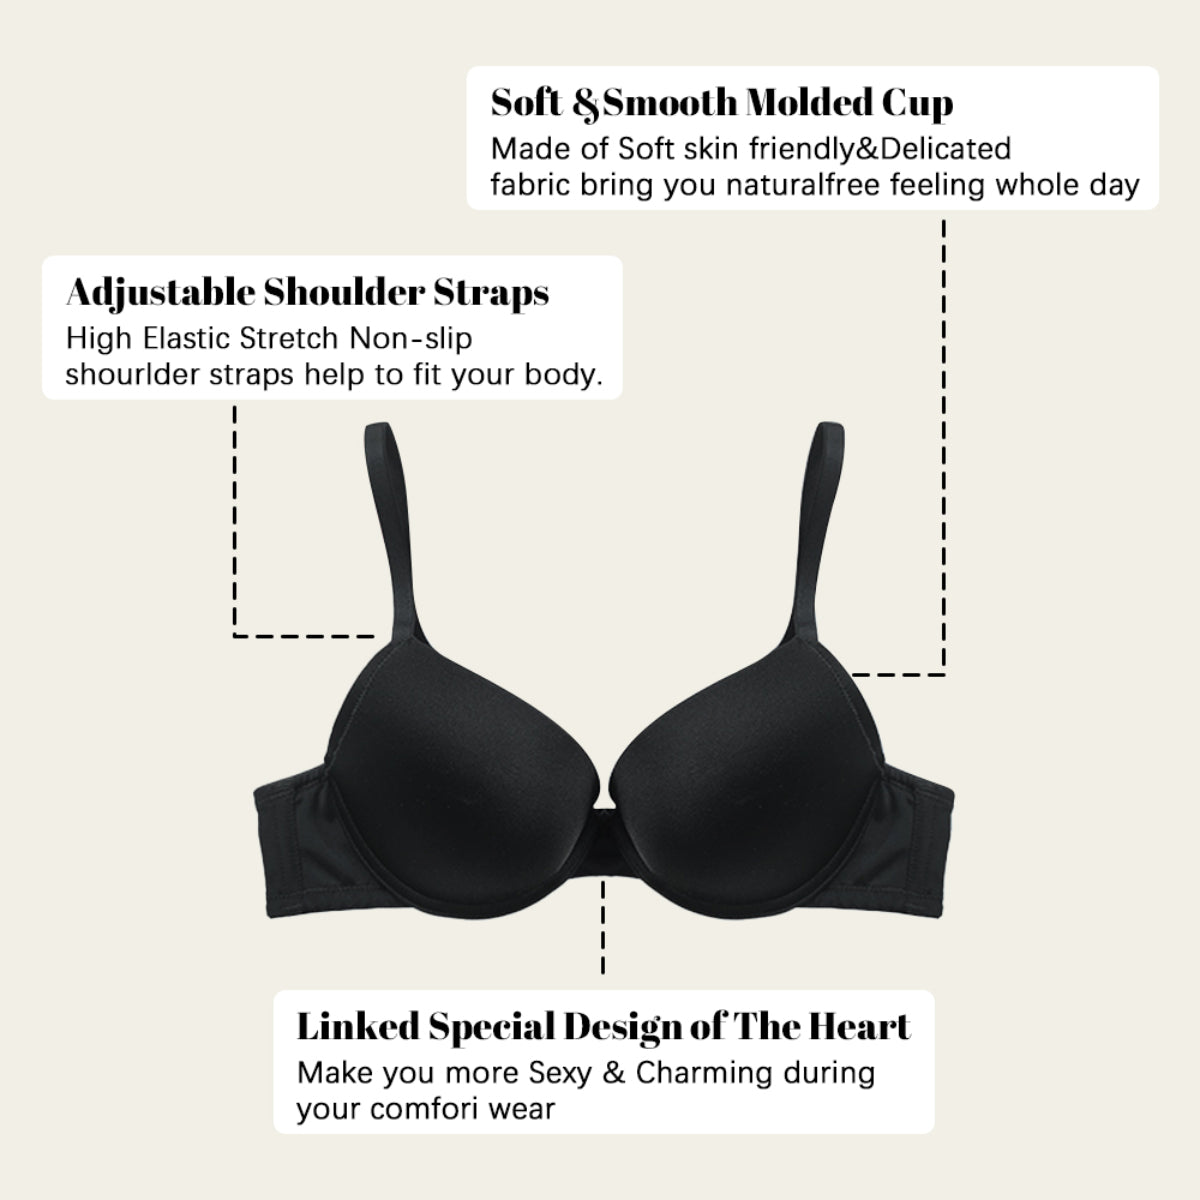 Women's Bras Clearance Ladies Comfortable Breathable No Steel Ring